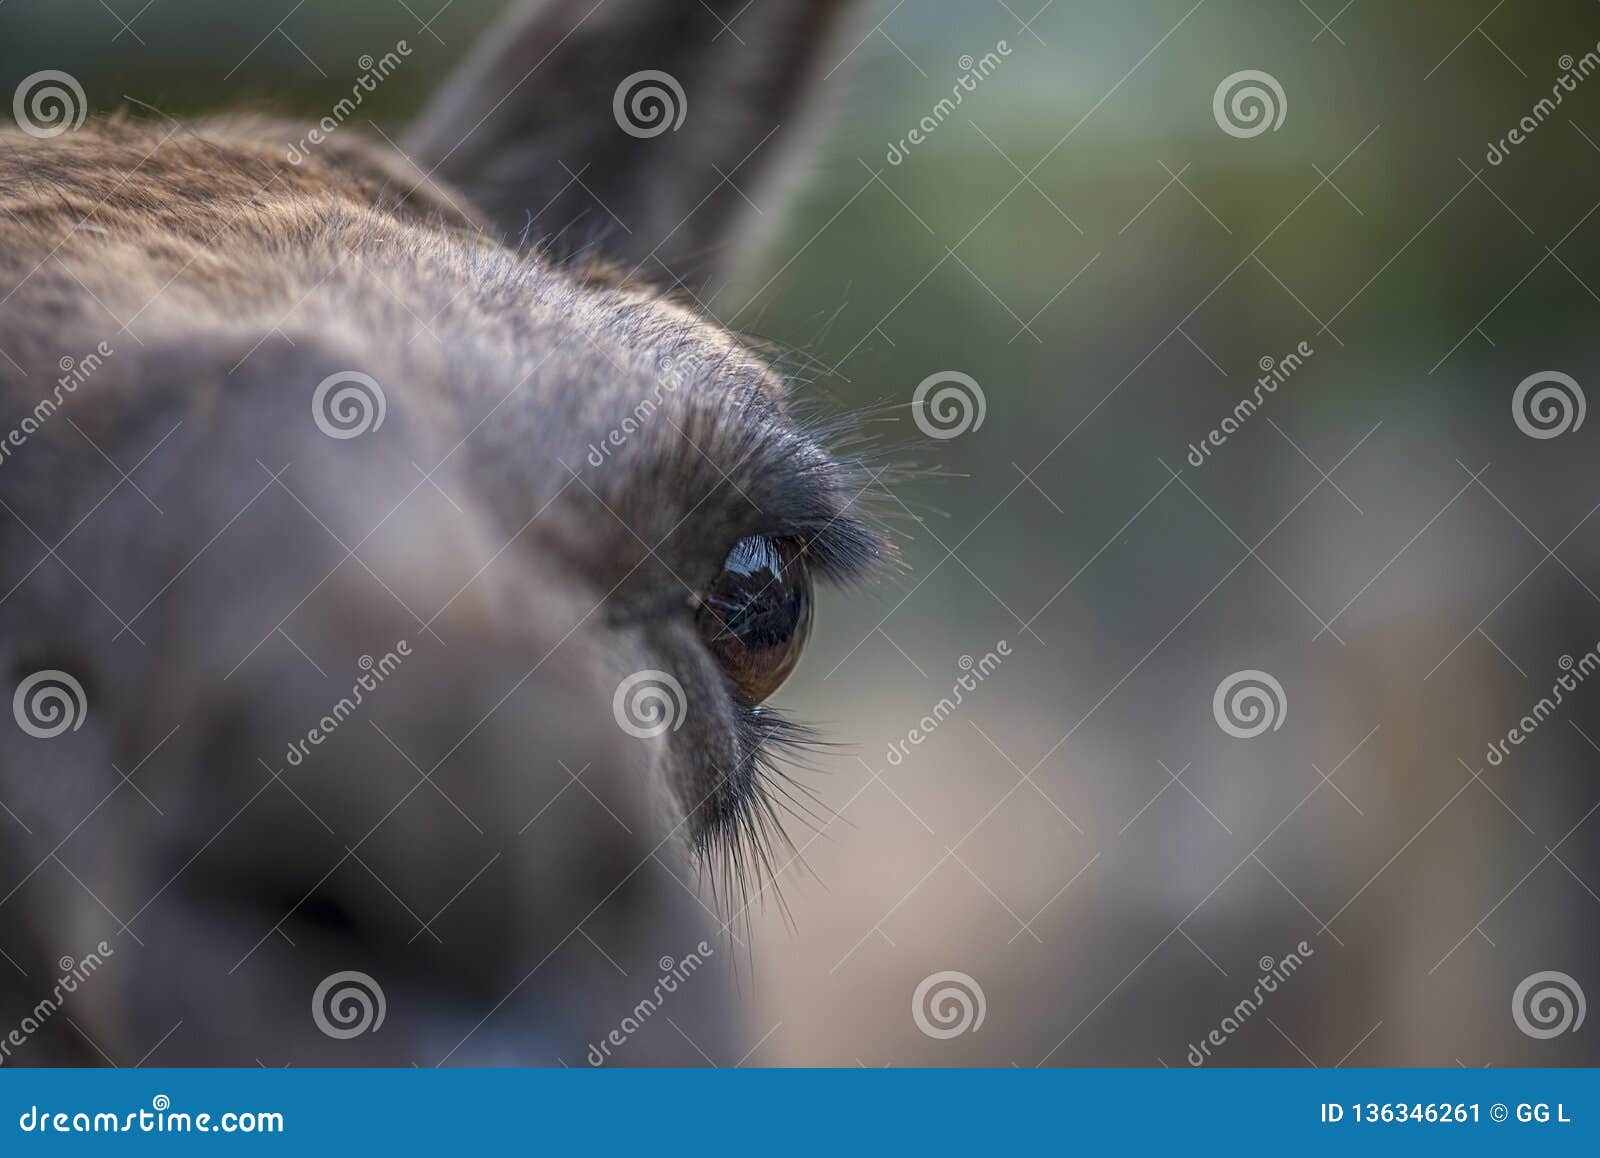 Close-up Of The Eye Of An Alpaca, Focusing On The Pupil ...
